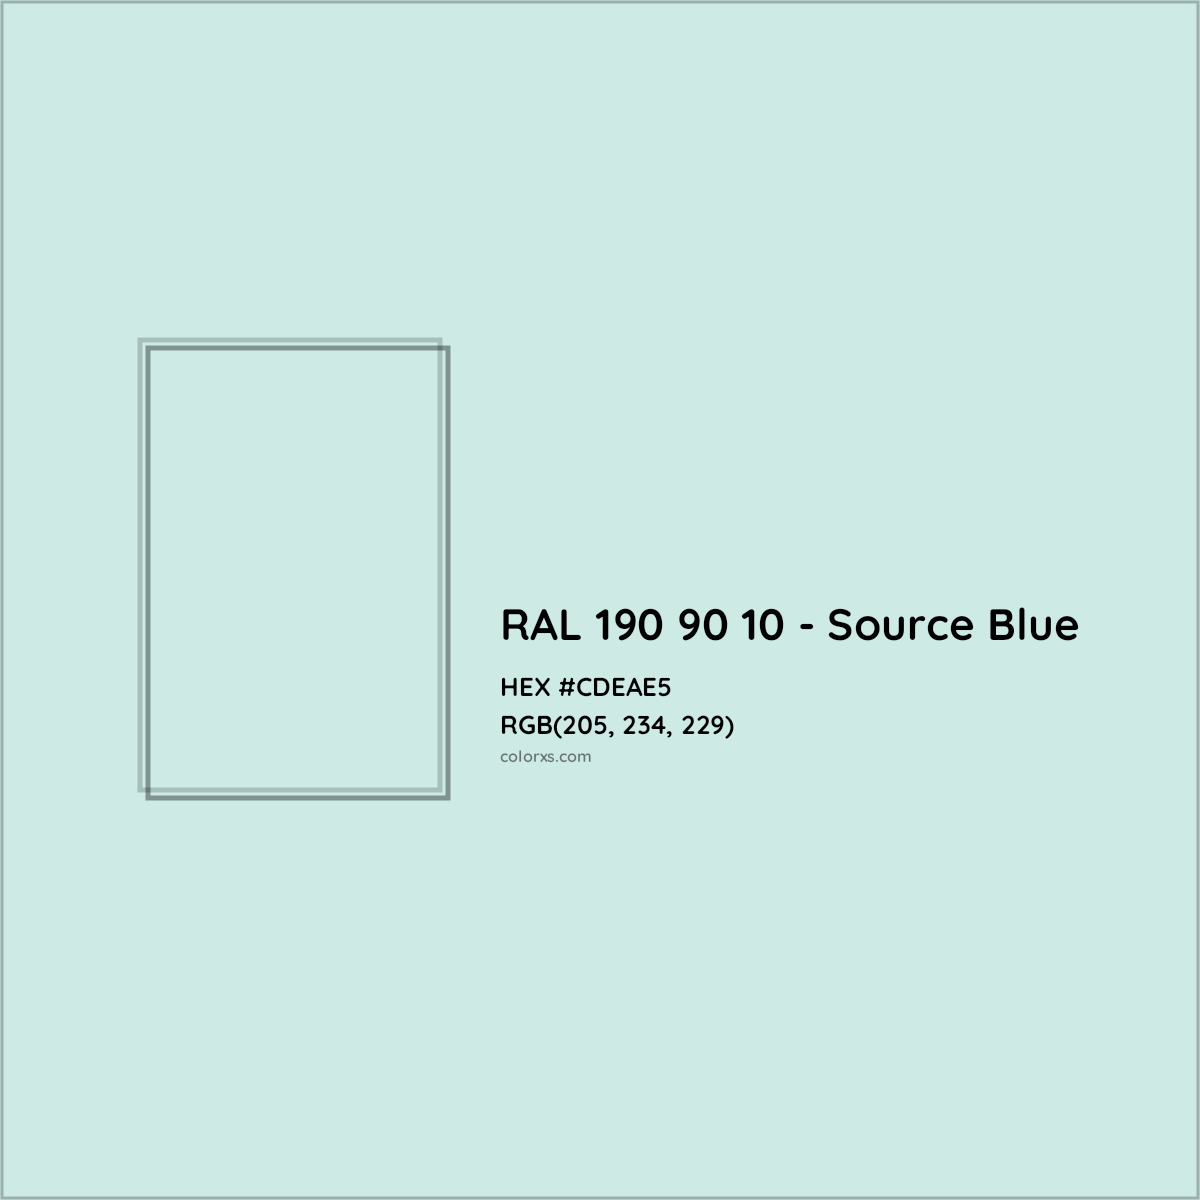 HEX #CDEAE5 RAL 190 90 10 - Source Blue CMS RAL Design - Color Code